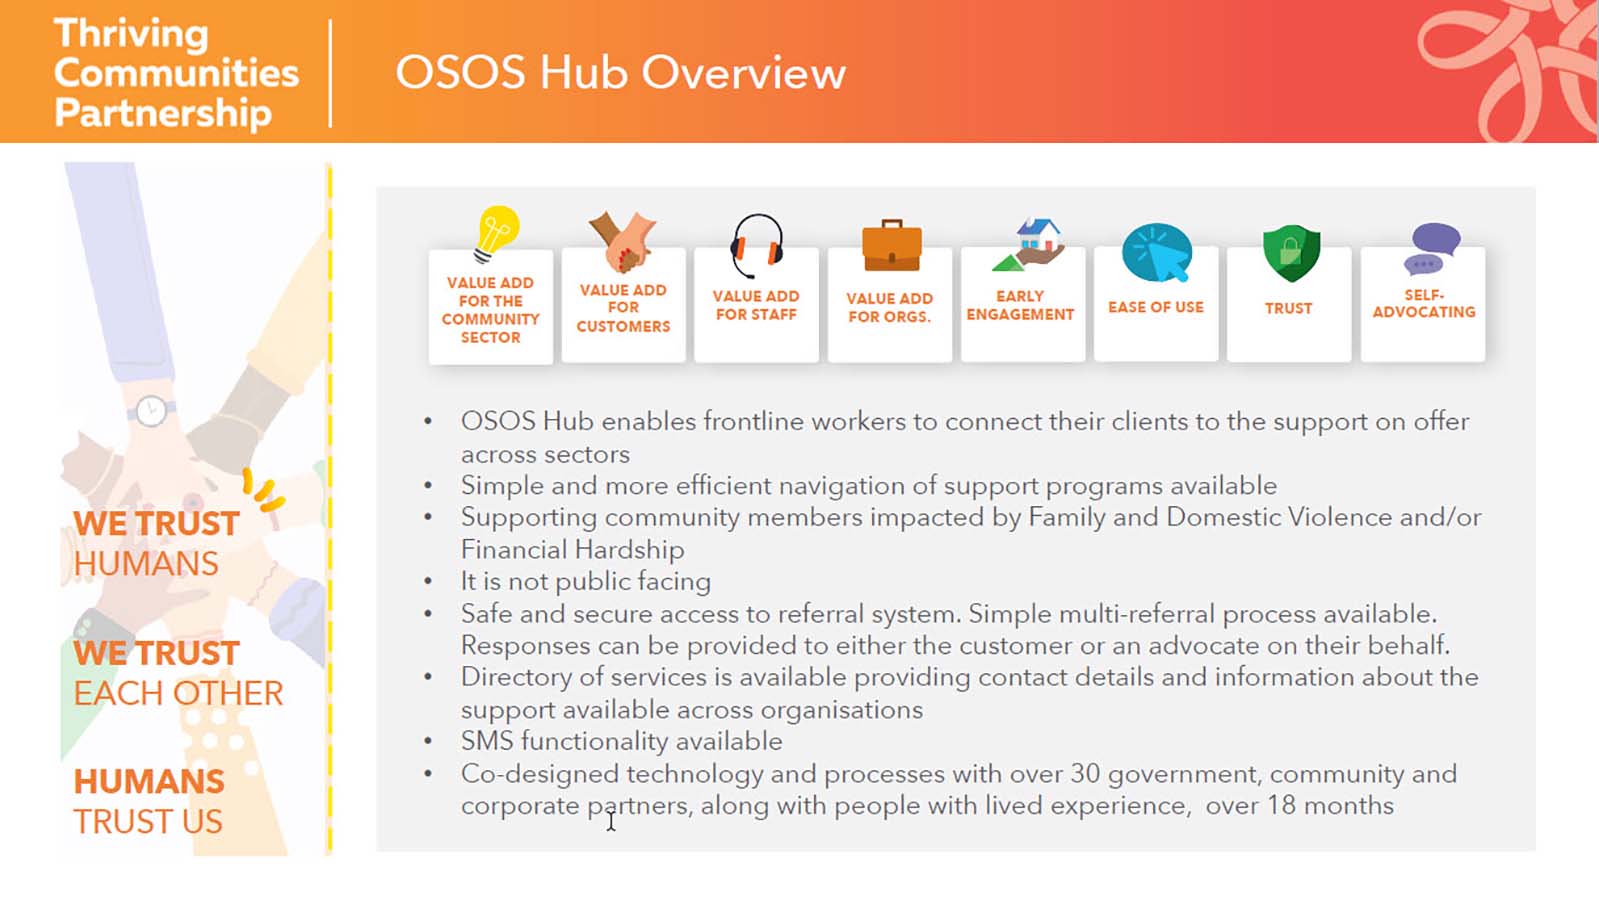 Overview slide explaining key aspects of the OSOS Hub functionality and impact for organisations and the community